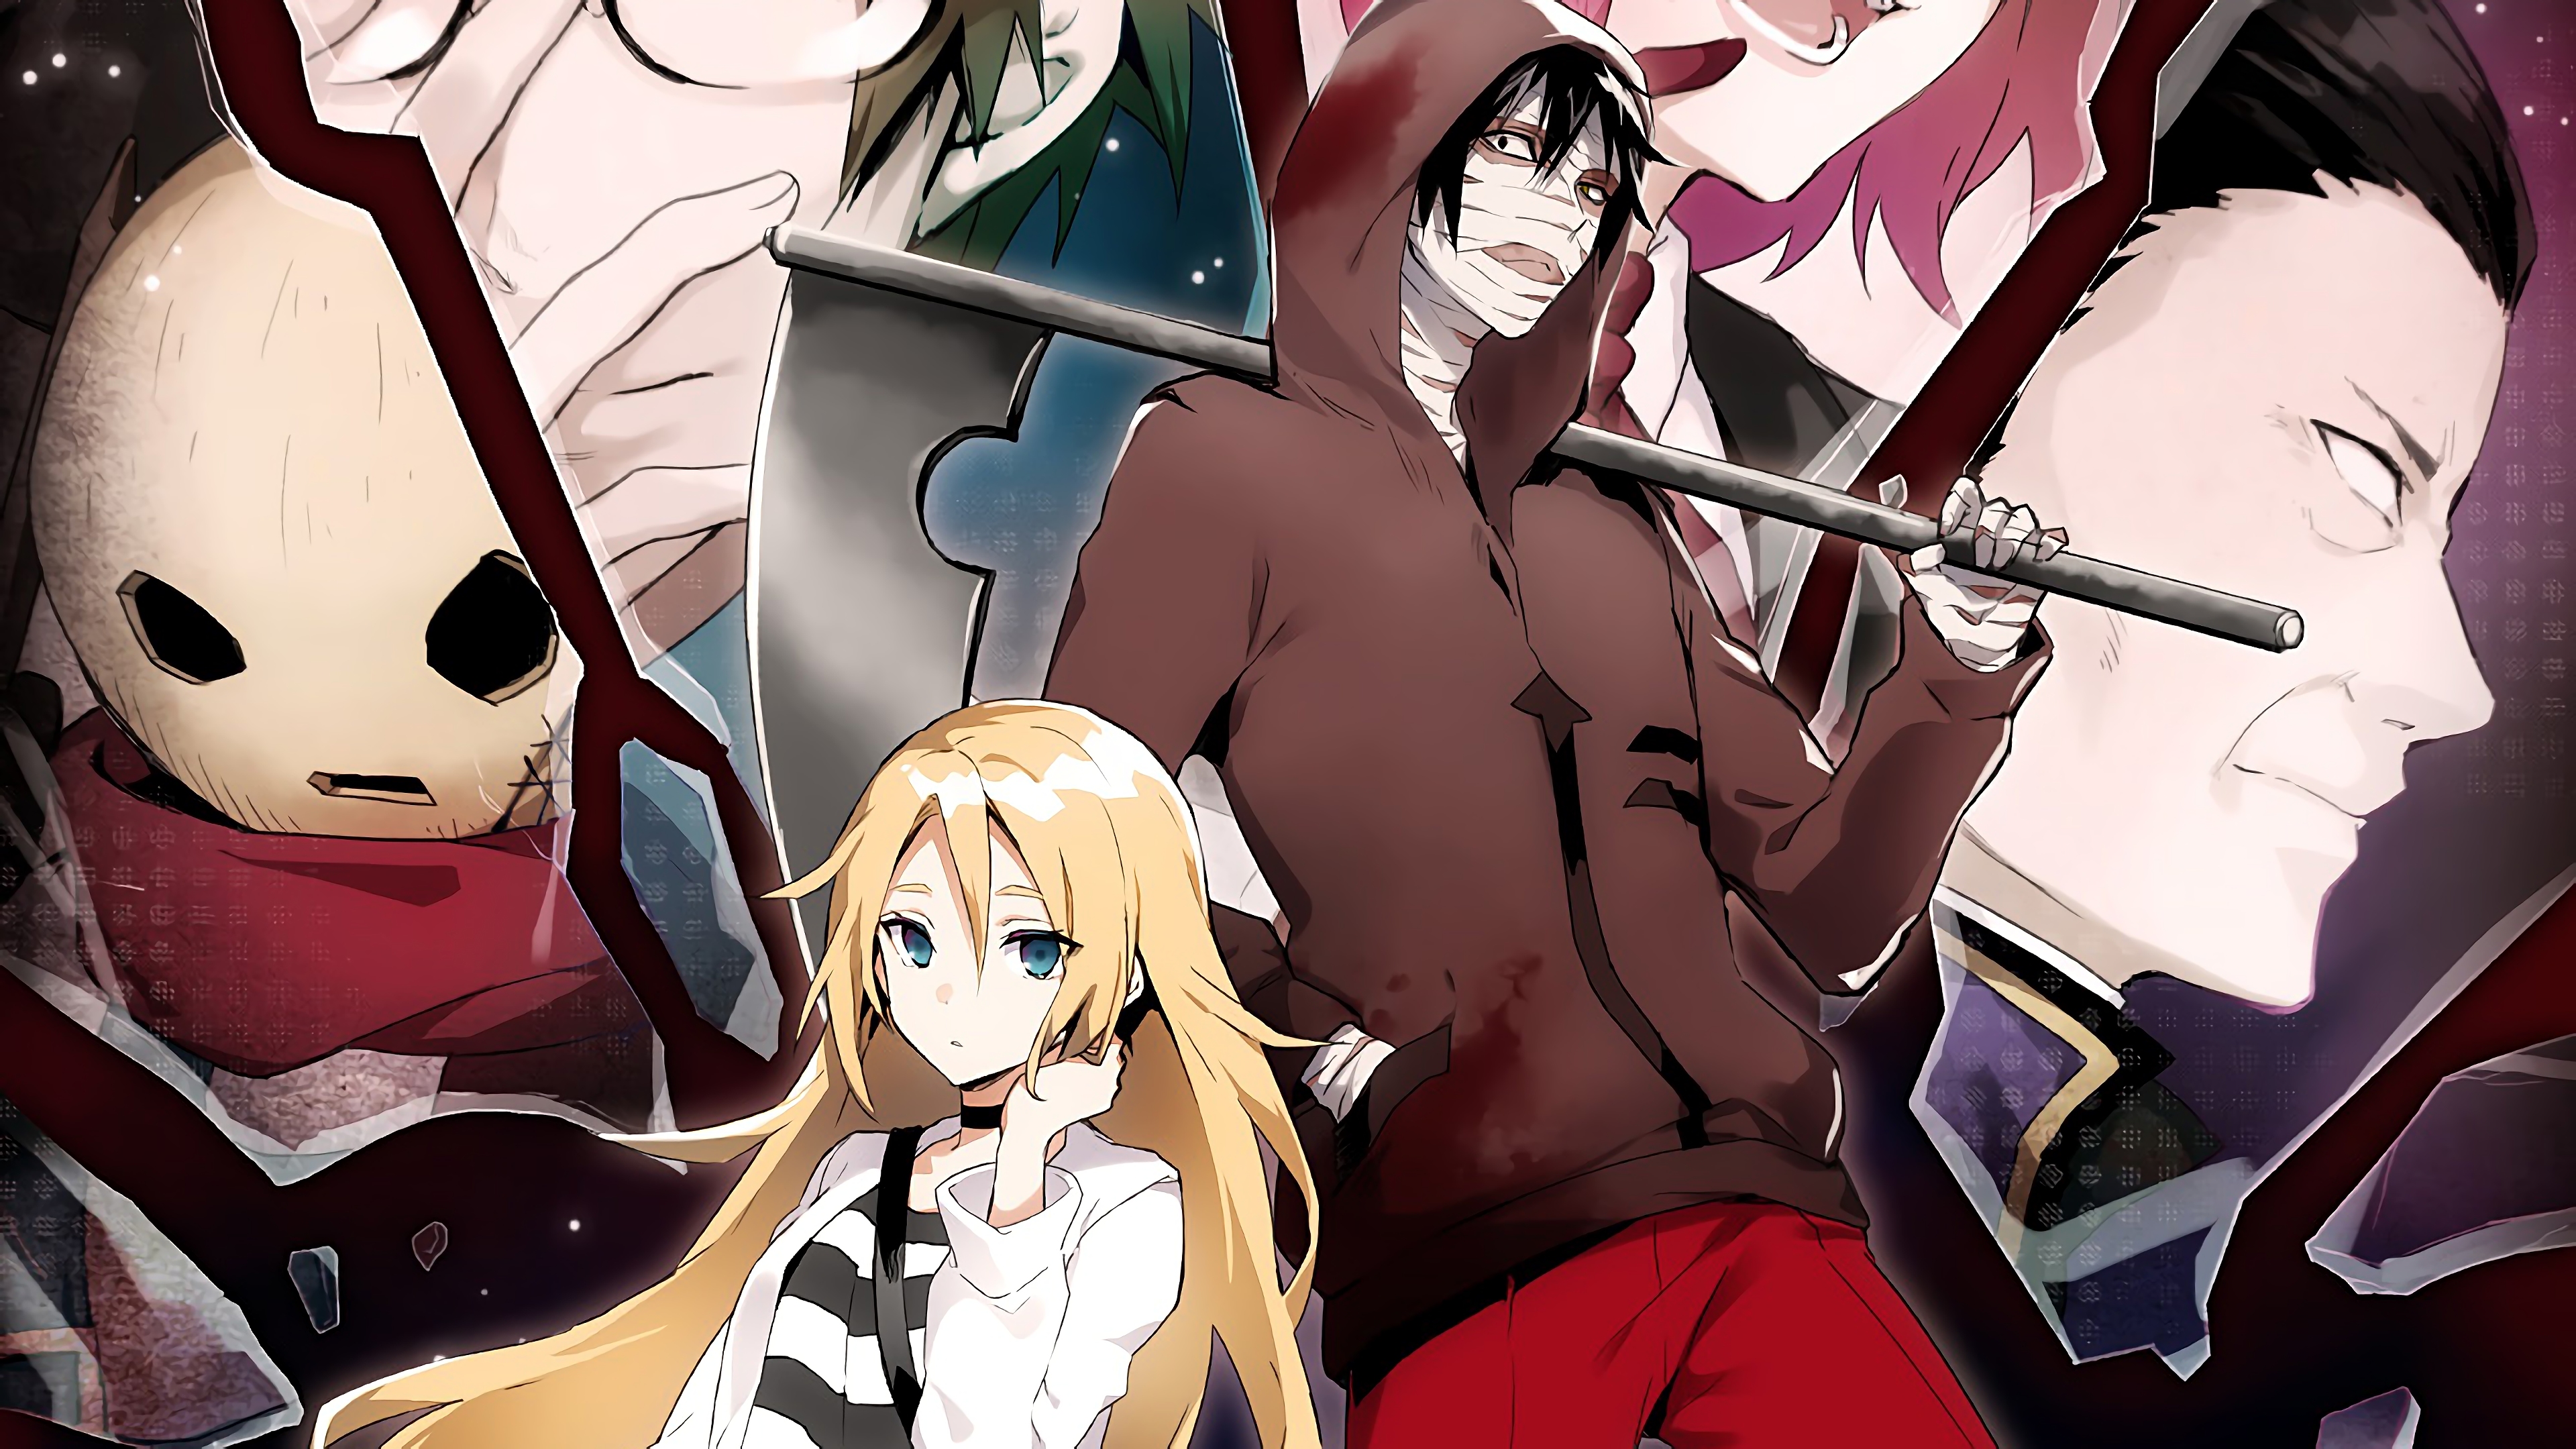 100+] Angels Of Death Backgrounds